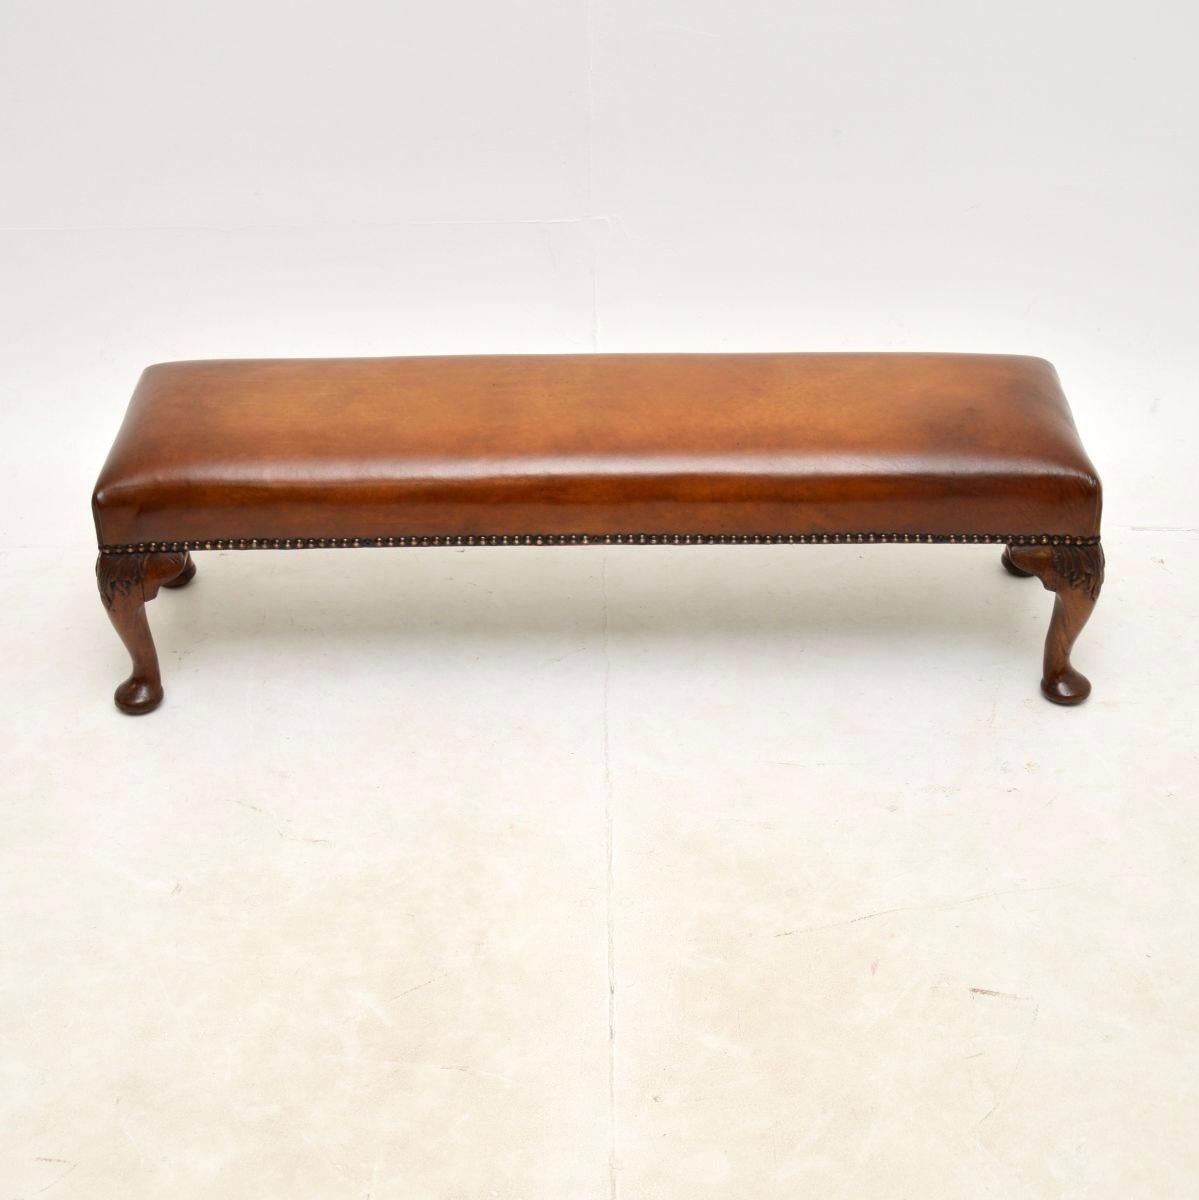 A charming antique foot stool. This was made in England, it dates from around the 1920’s.

It is of fantastic quality and is a useful size. It sits on solid cabriole legs with carving at the knees. We have had this newly upholstered in leather that